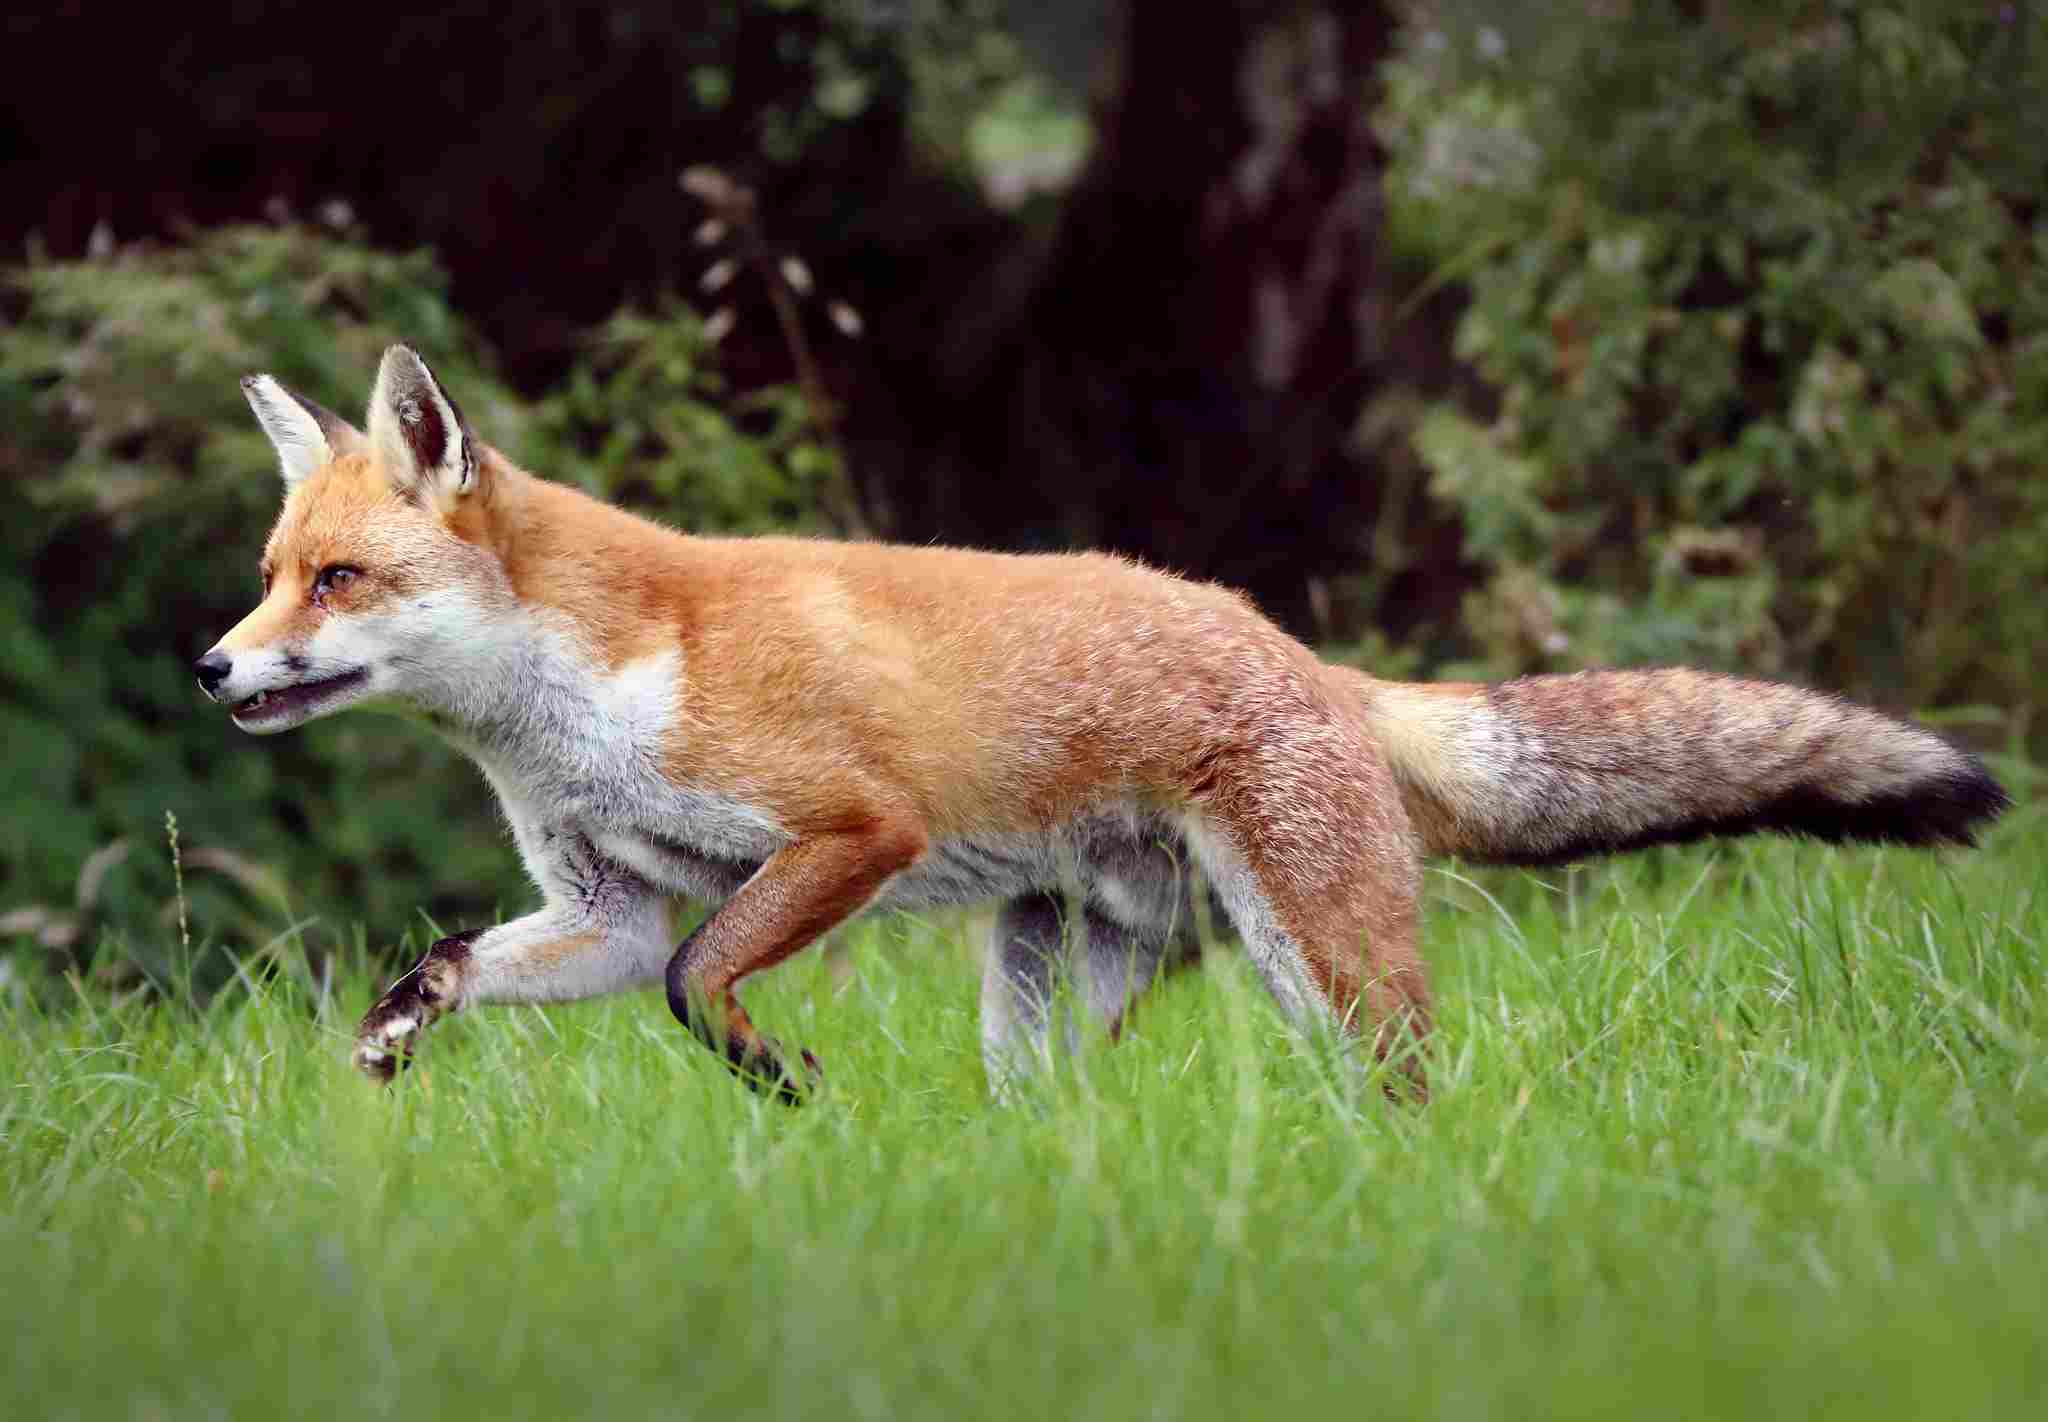 What Animal Eats a Fox: A Fox May Act as Both Predator and Prey in the Ecosystem (Credit: Charlie Marshall 2020 .CC BY 2.0.)